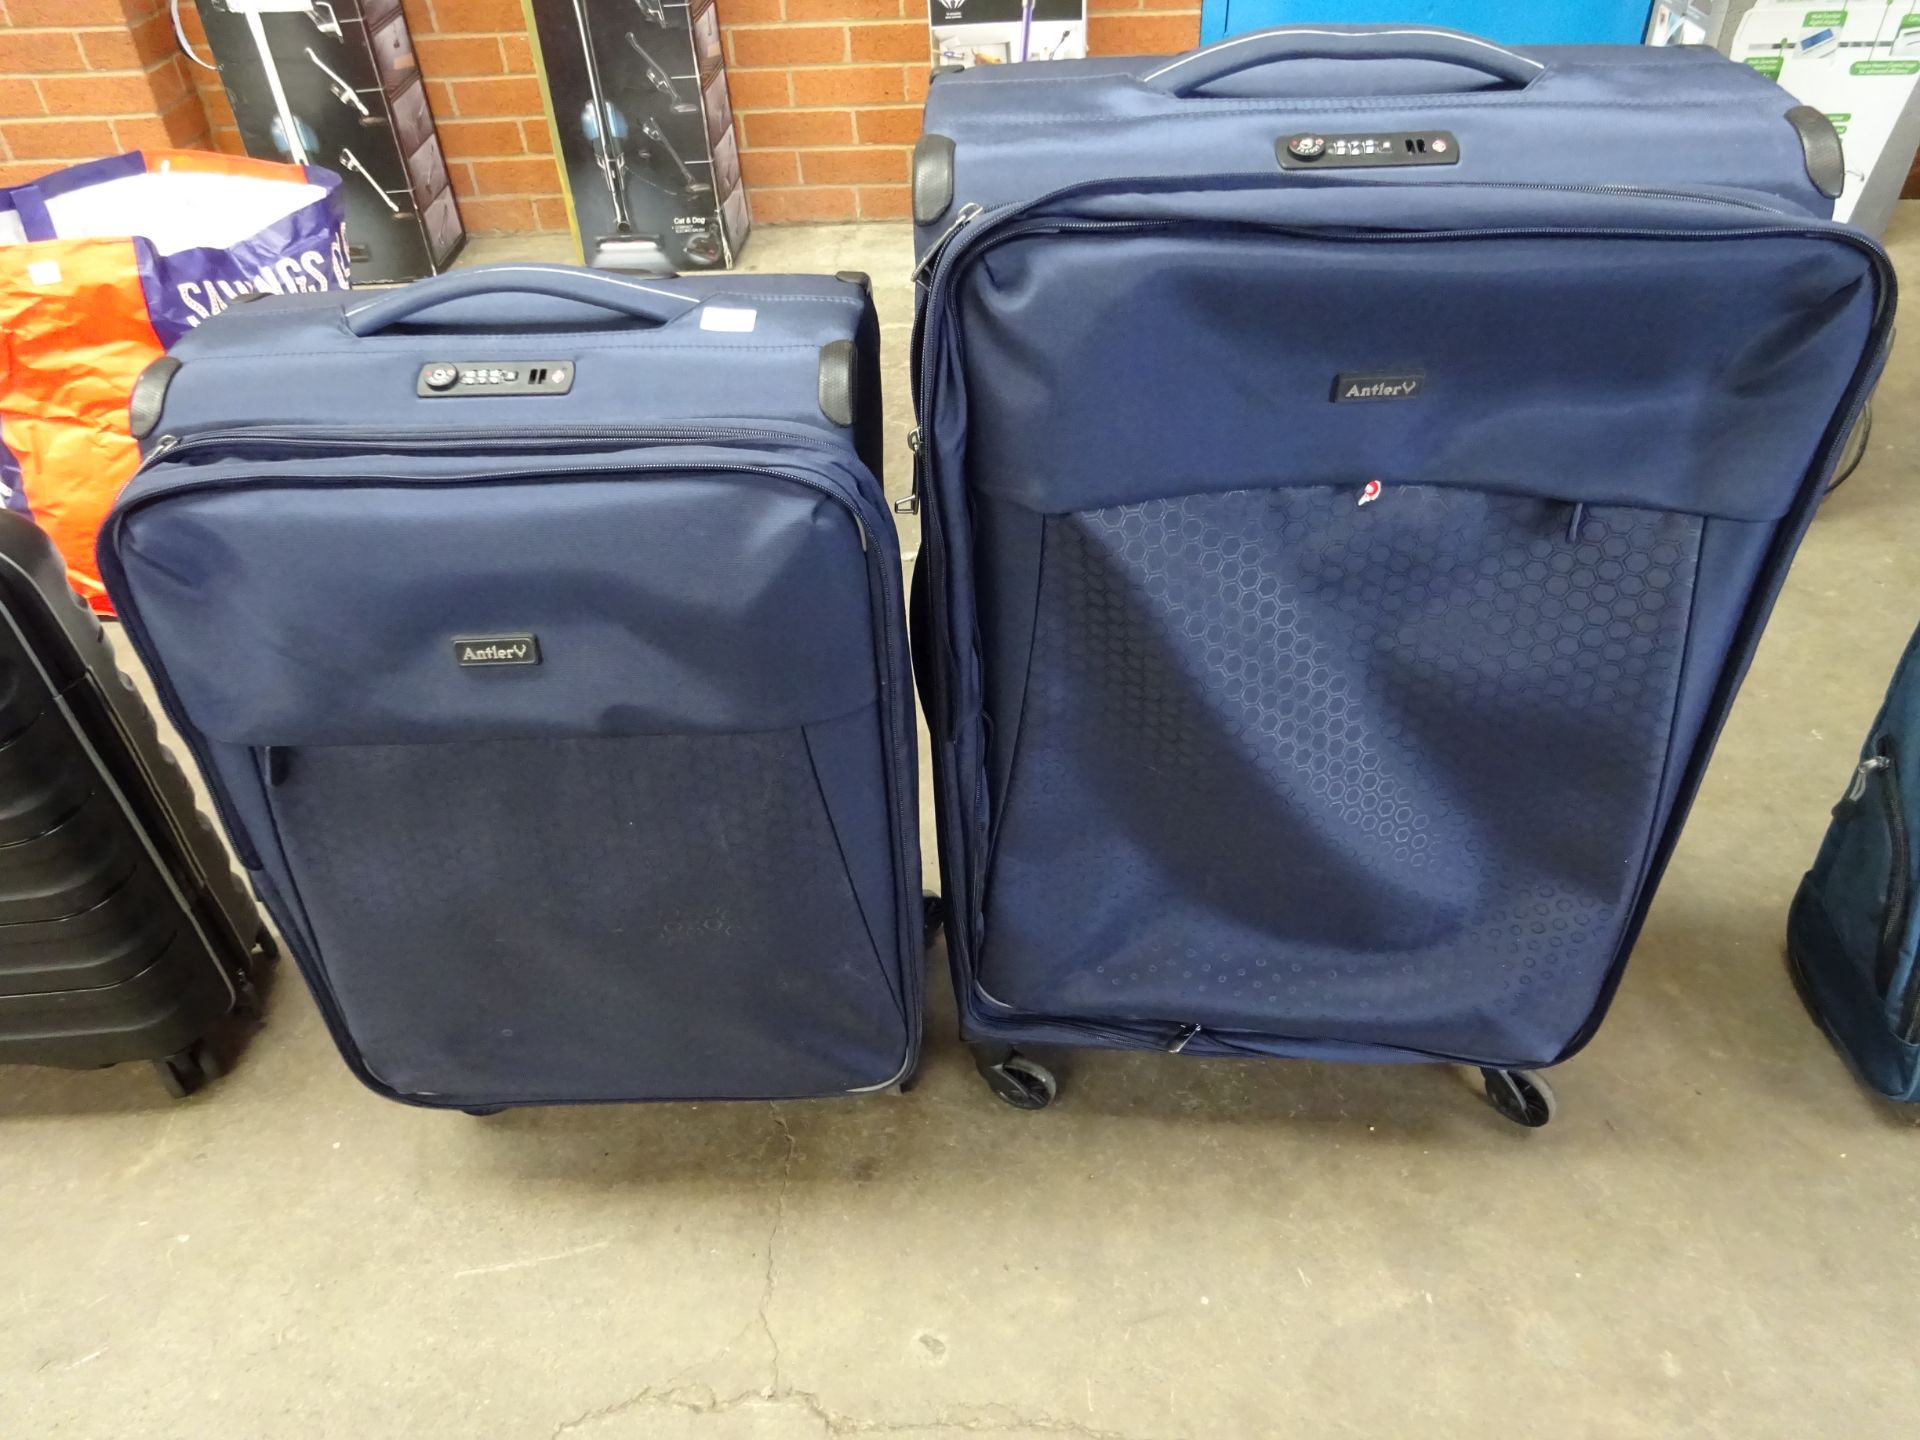 x 2 blue antler suitcases